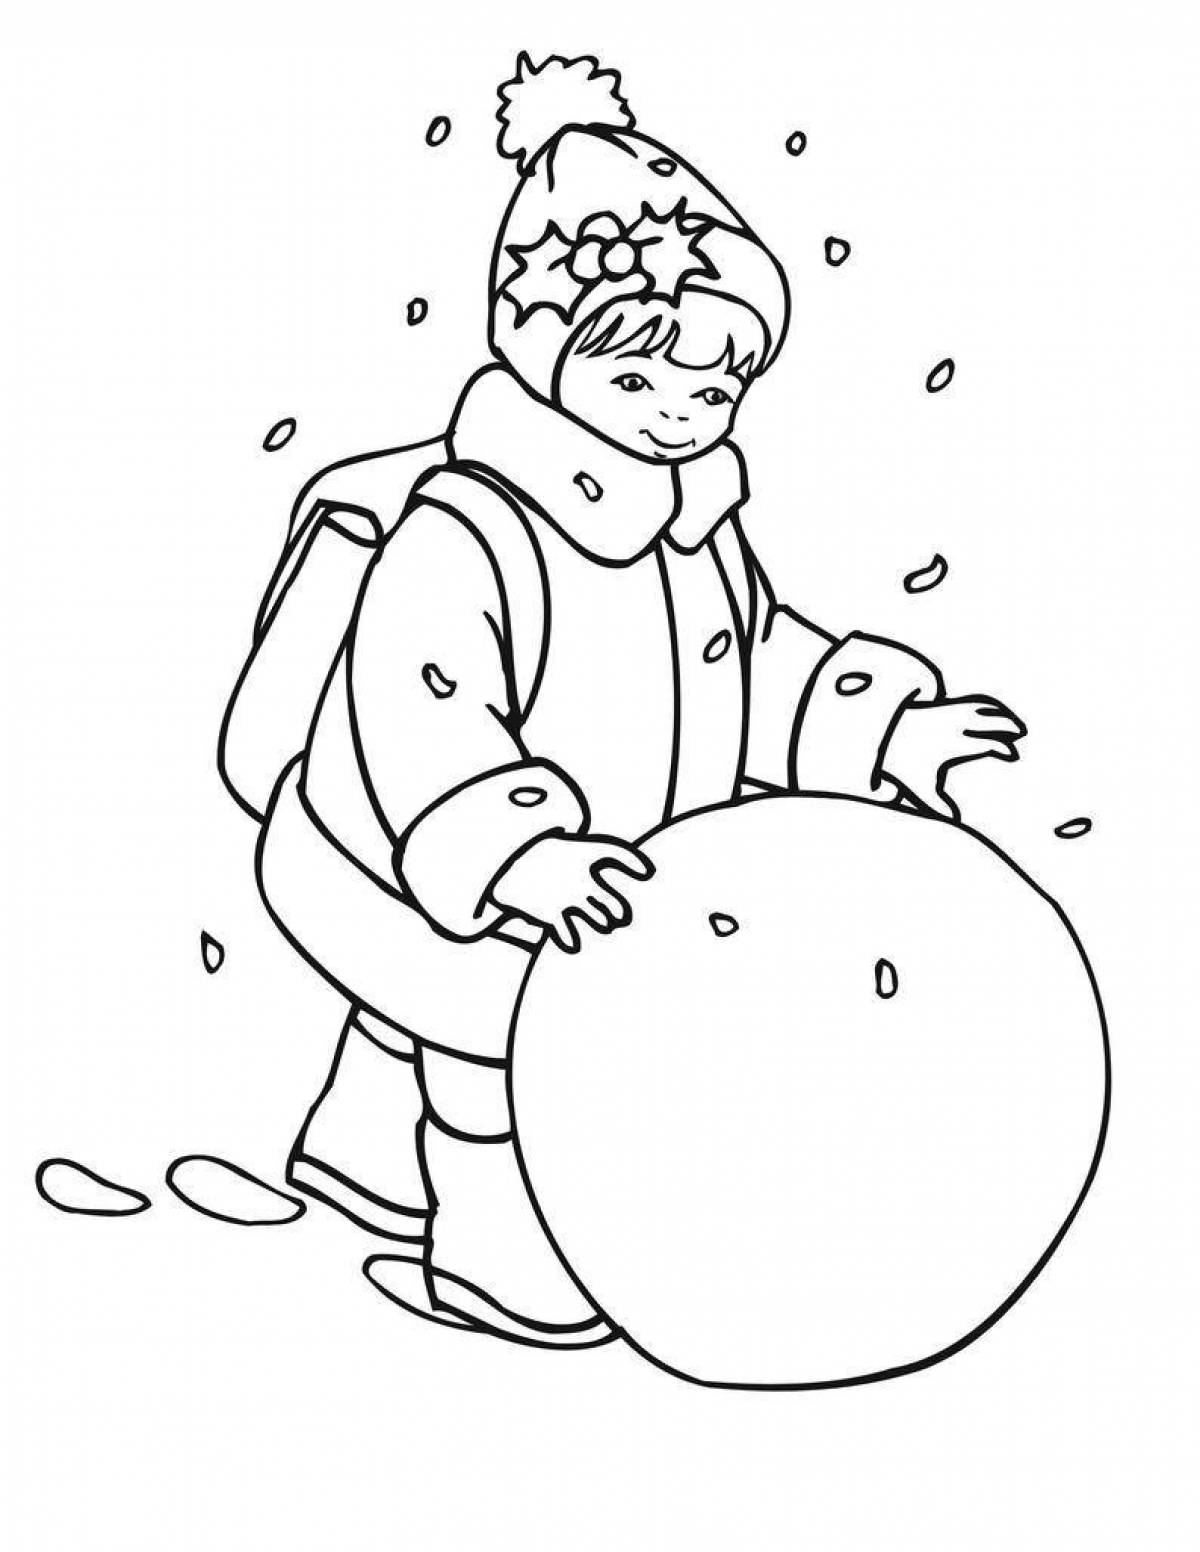 Witty snowball coloring page